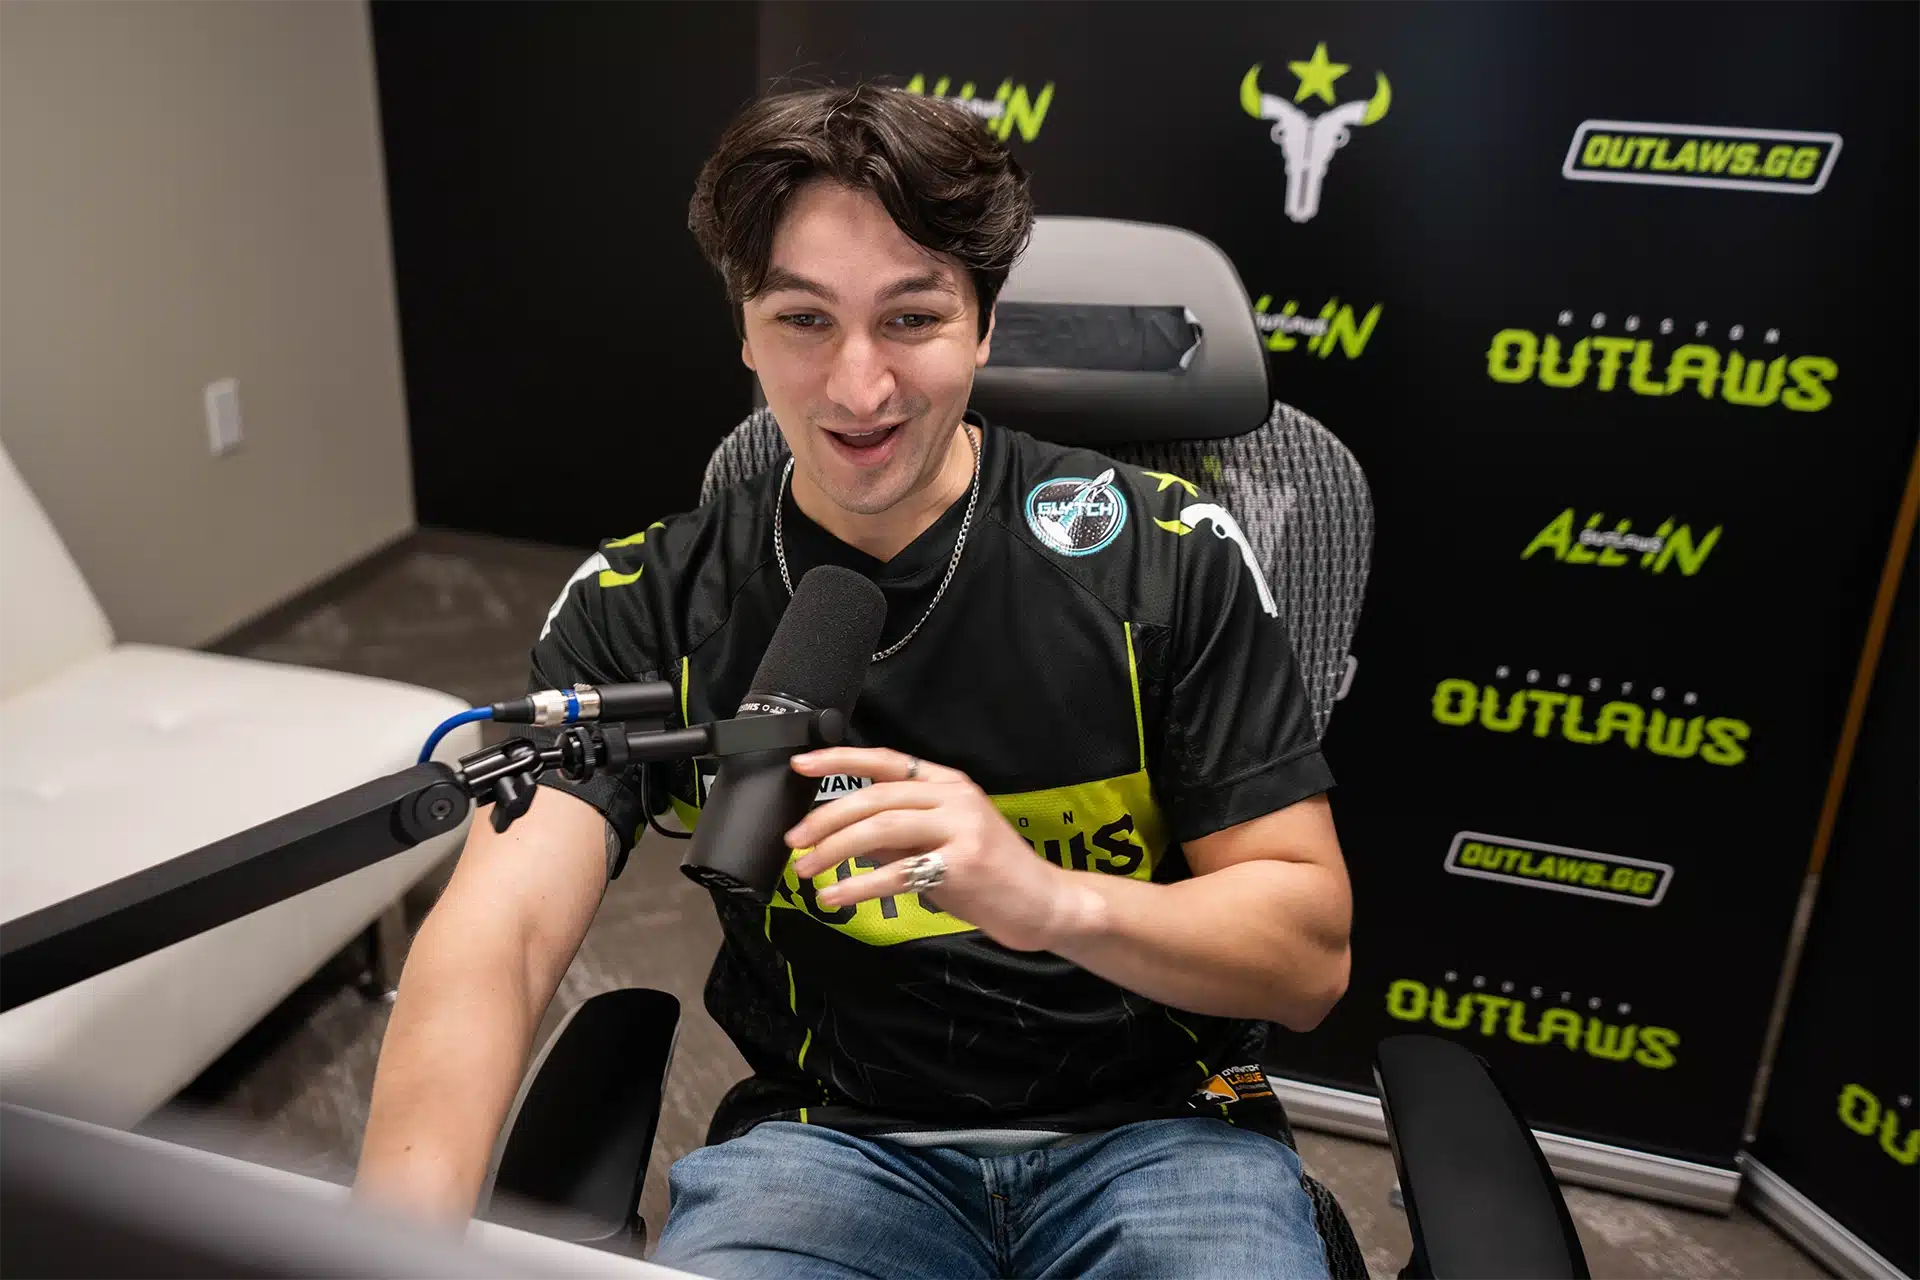 outlaws esports streamer sitting in gaming chair with microphone